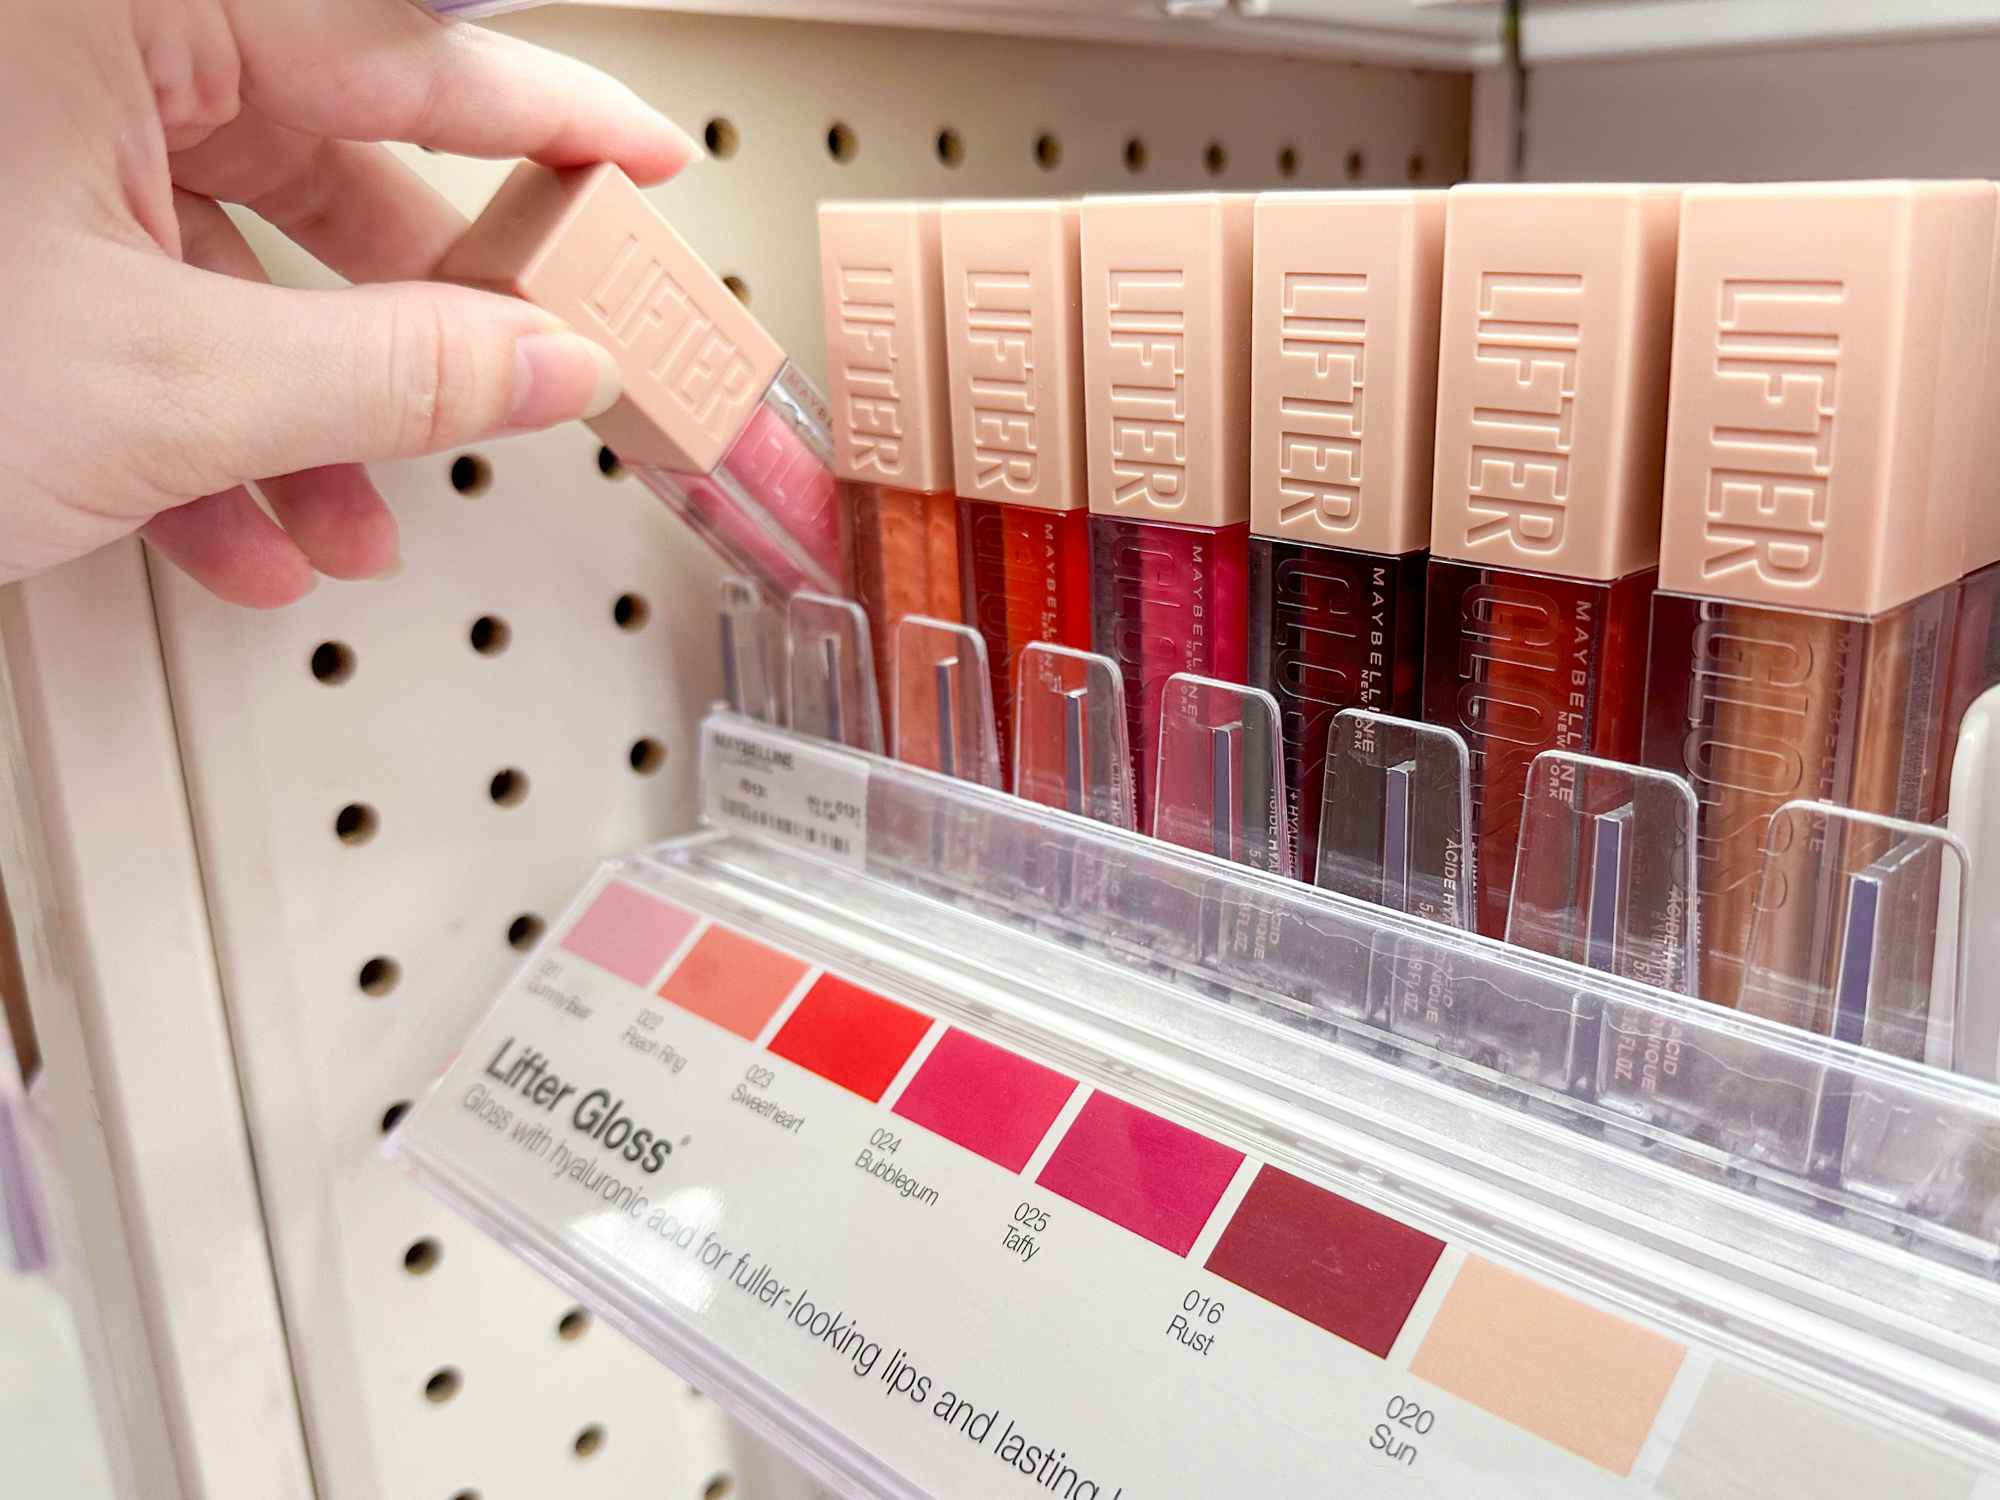 Someone shopping for Maybelline Lifter Gloss at the store